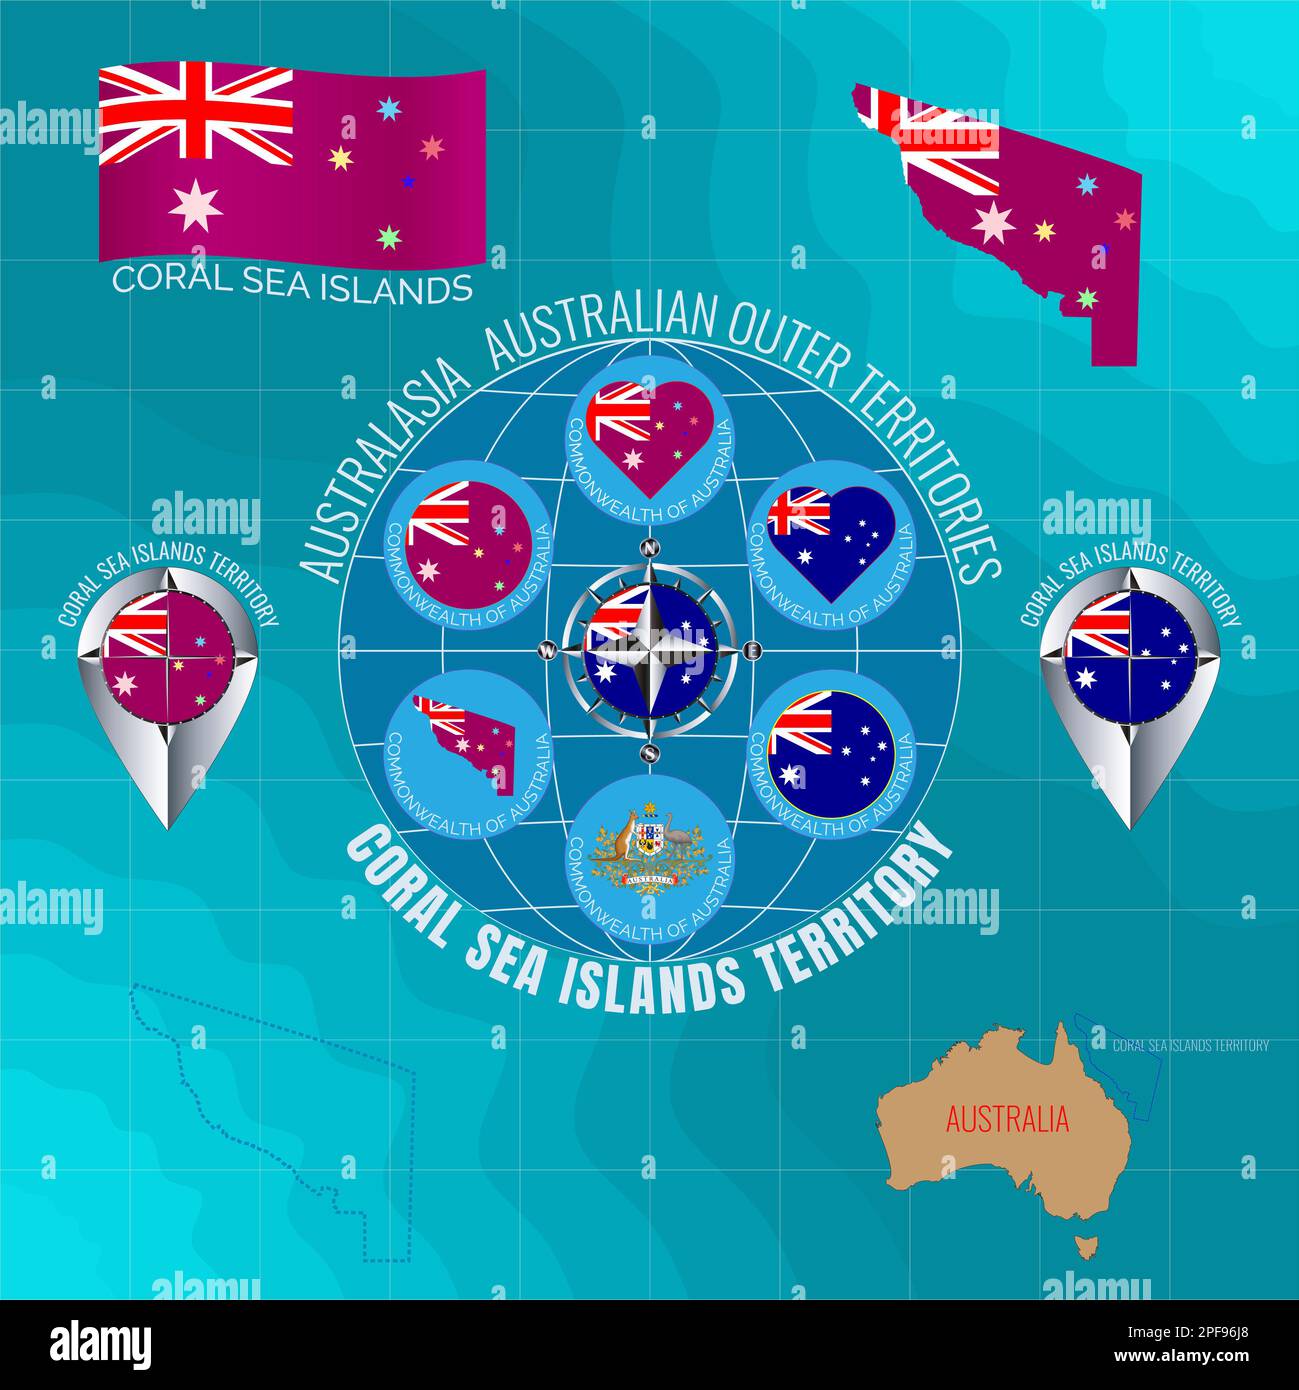 Set of illustrations of flag, outline map, icons CORAL SEA ISLANDS TERRITORY. AUSTRALIAN OUTER TERRITORIES. Travel concept. Stock Photo